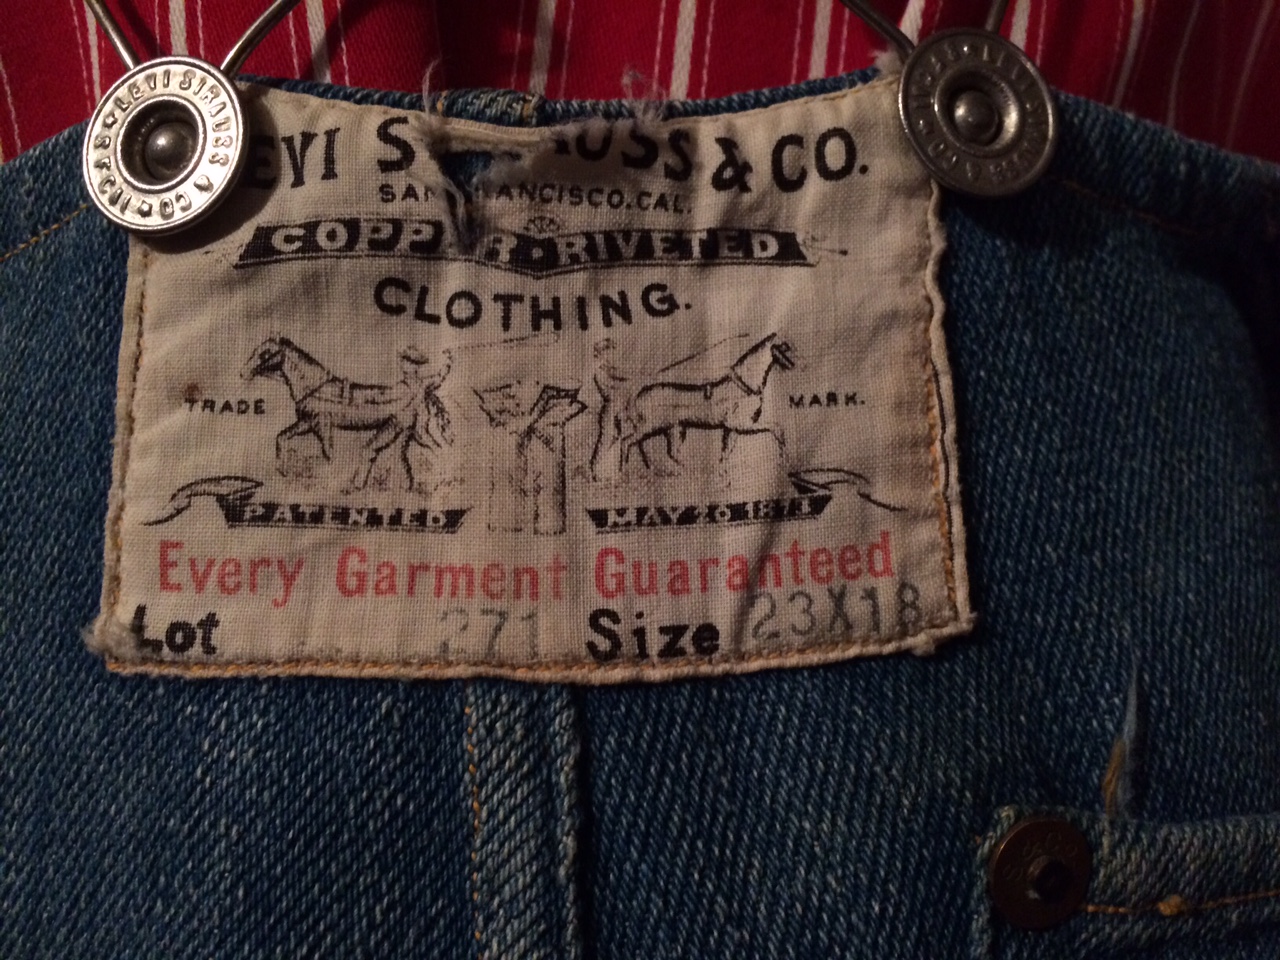 Vintage Levi's Overalls Hidden in the Attic : Levi Strauss & Co